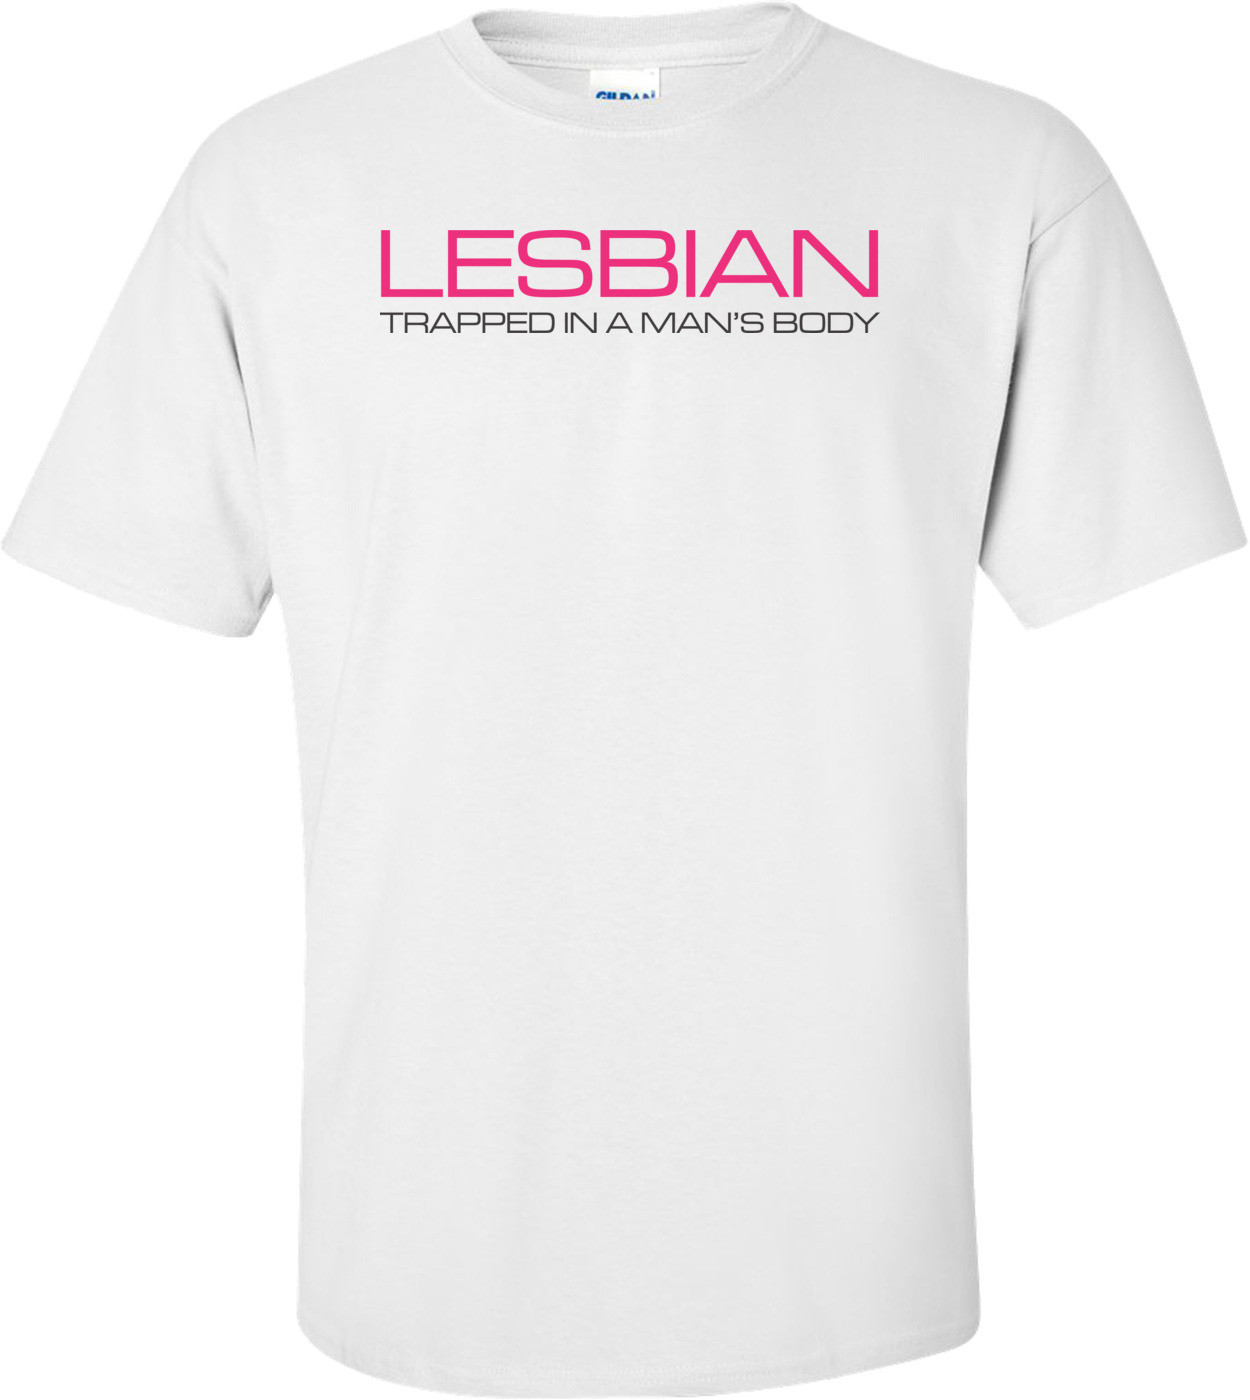 Lesbian Trapped In A Man's Body T-shirt